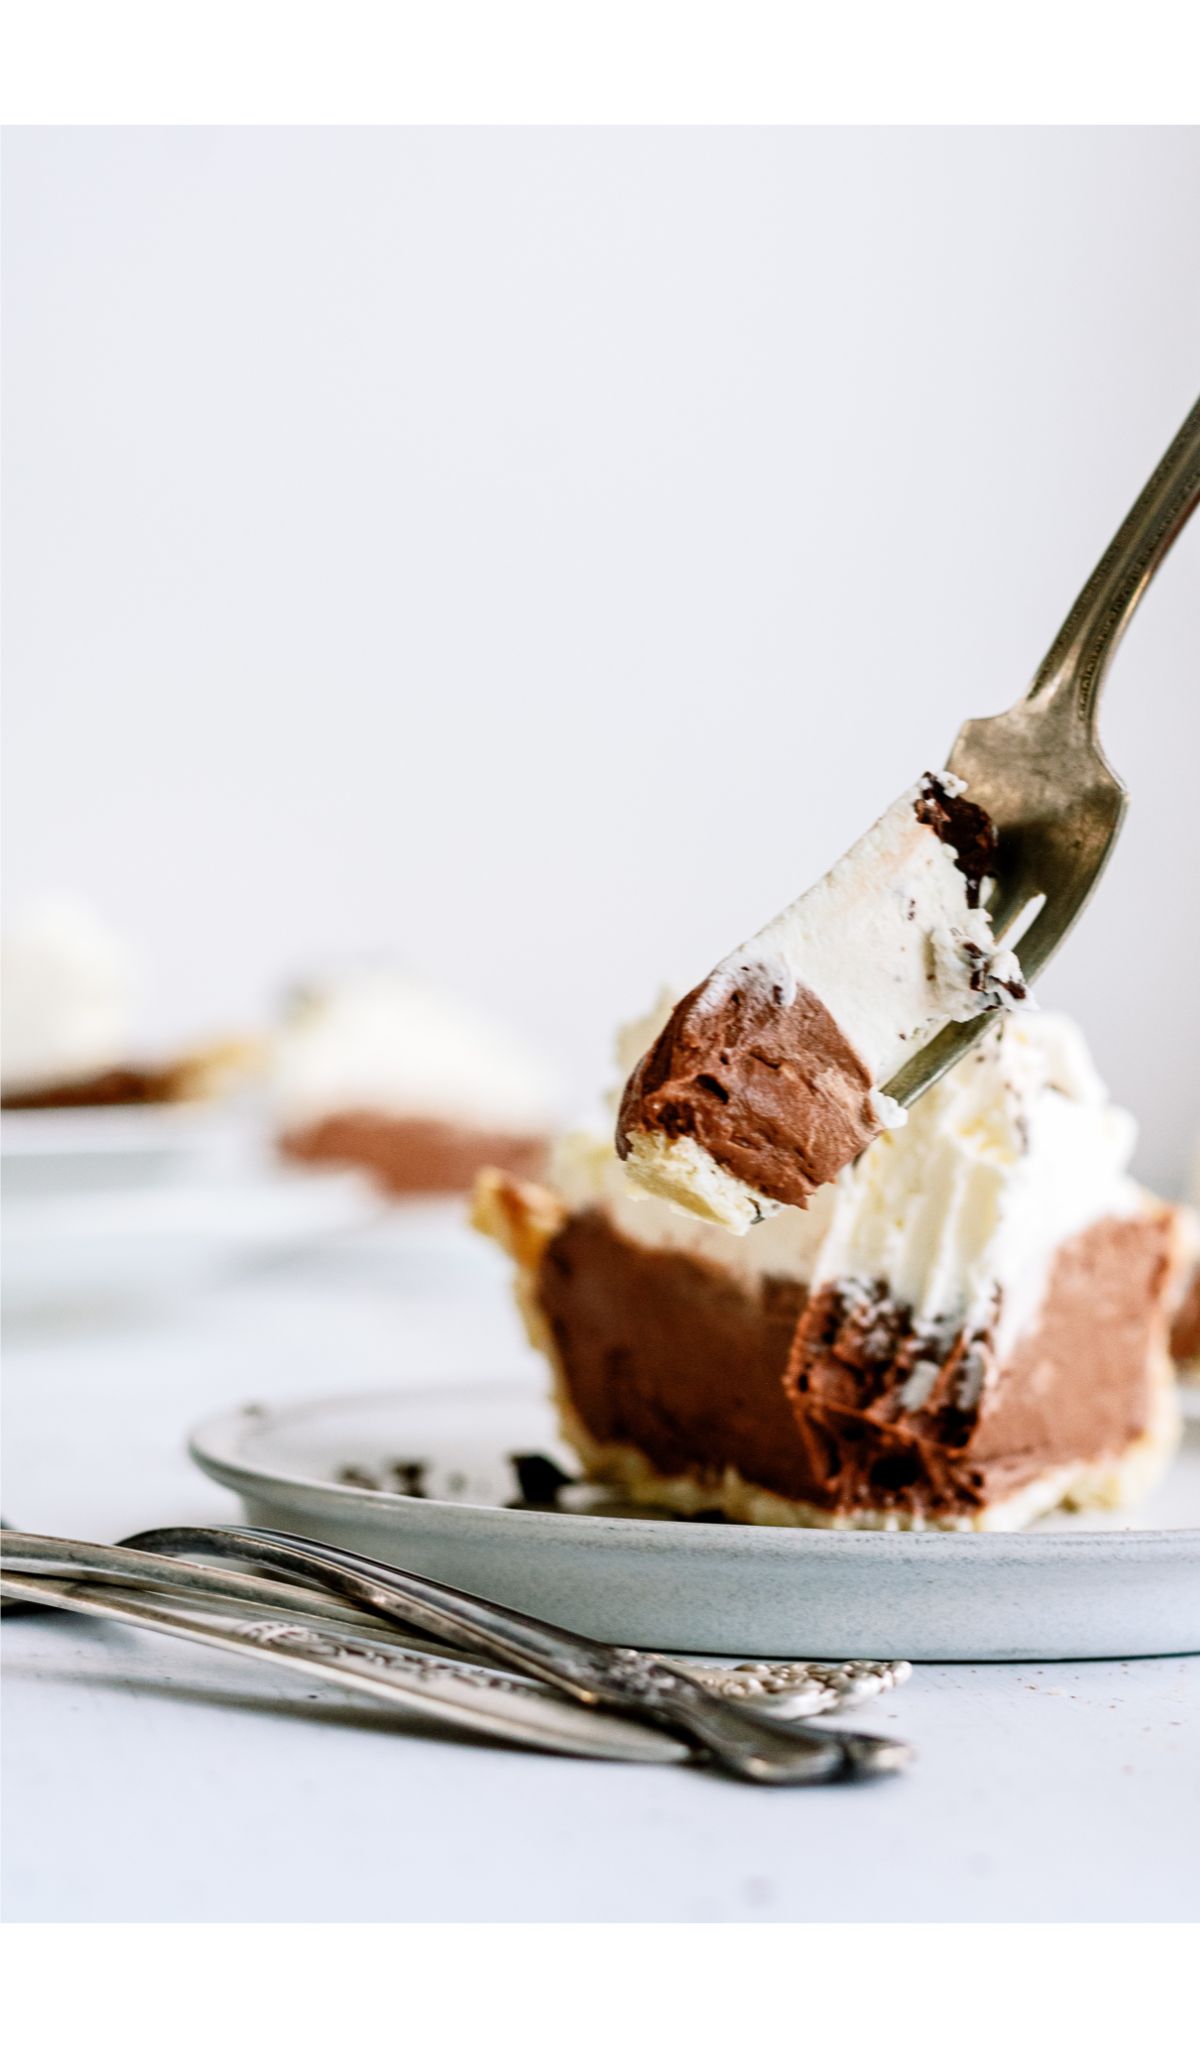 A fork taking a bite out of a slice of Easy Chocolate Cream Pie on a plate